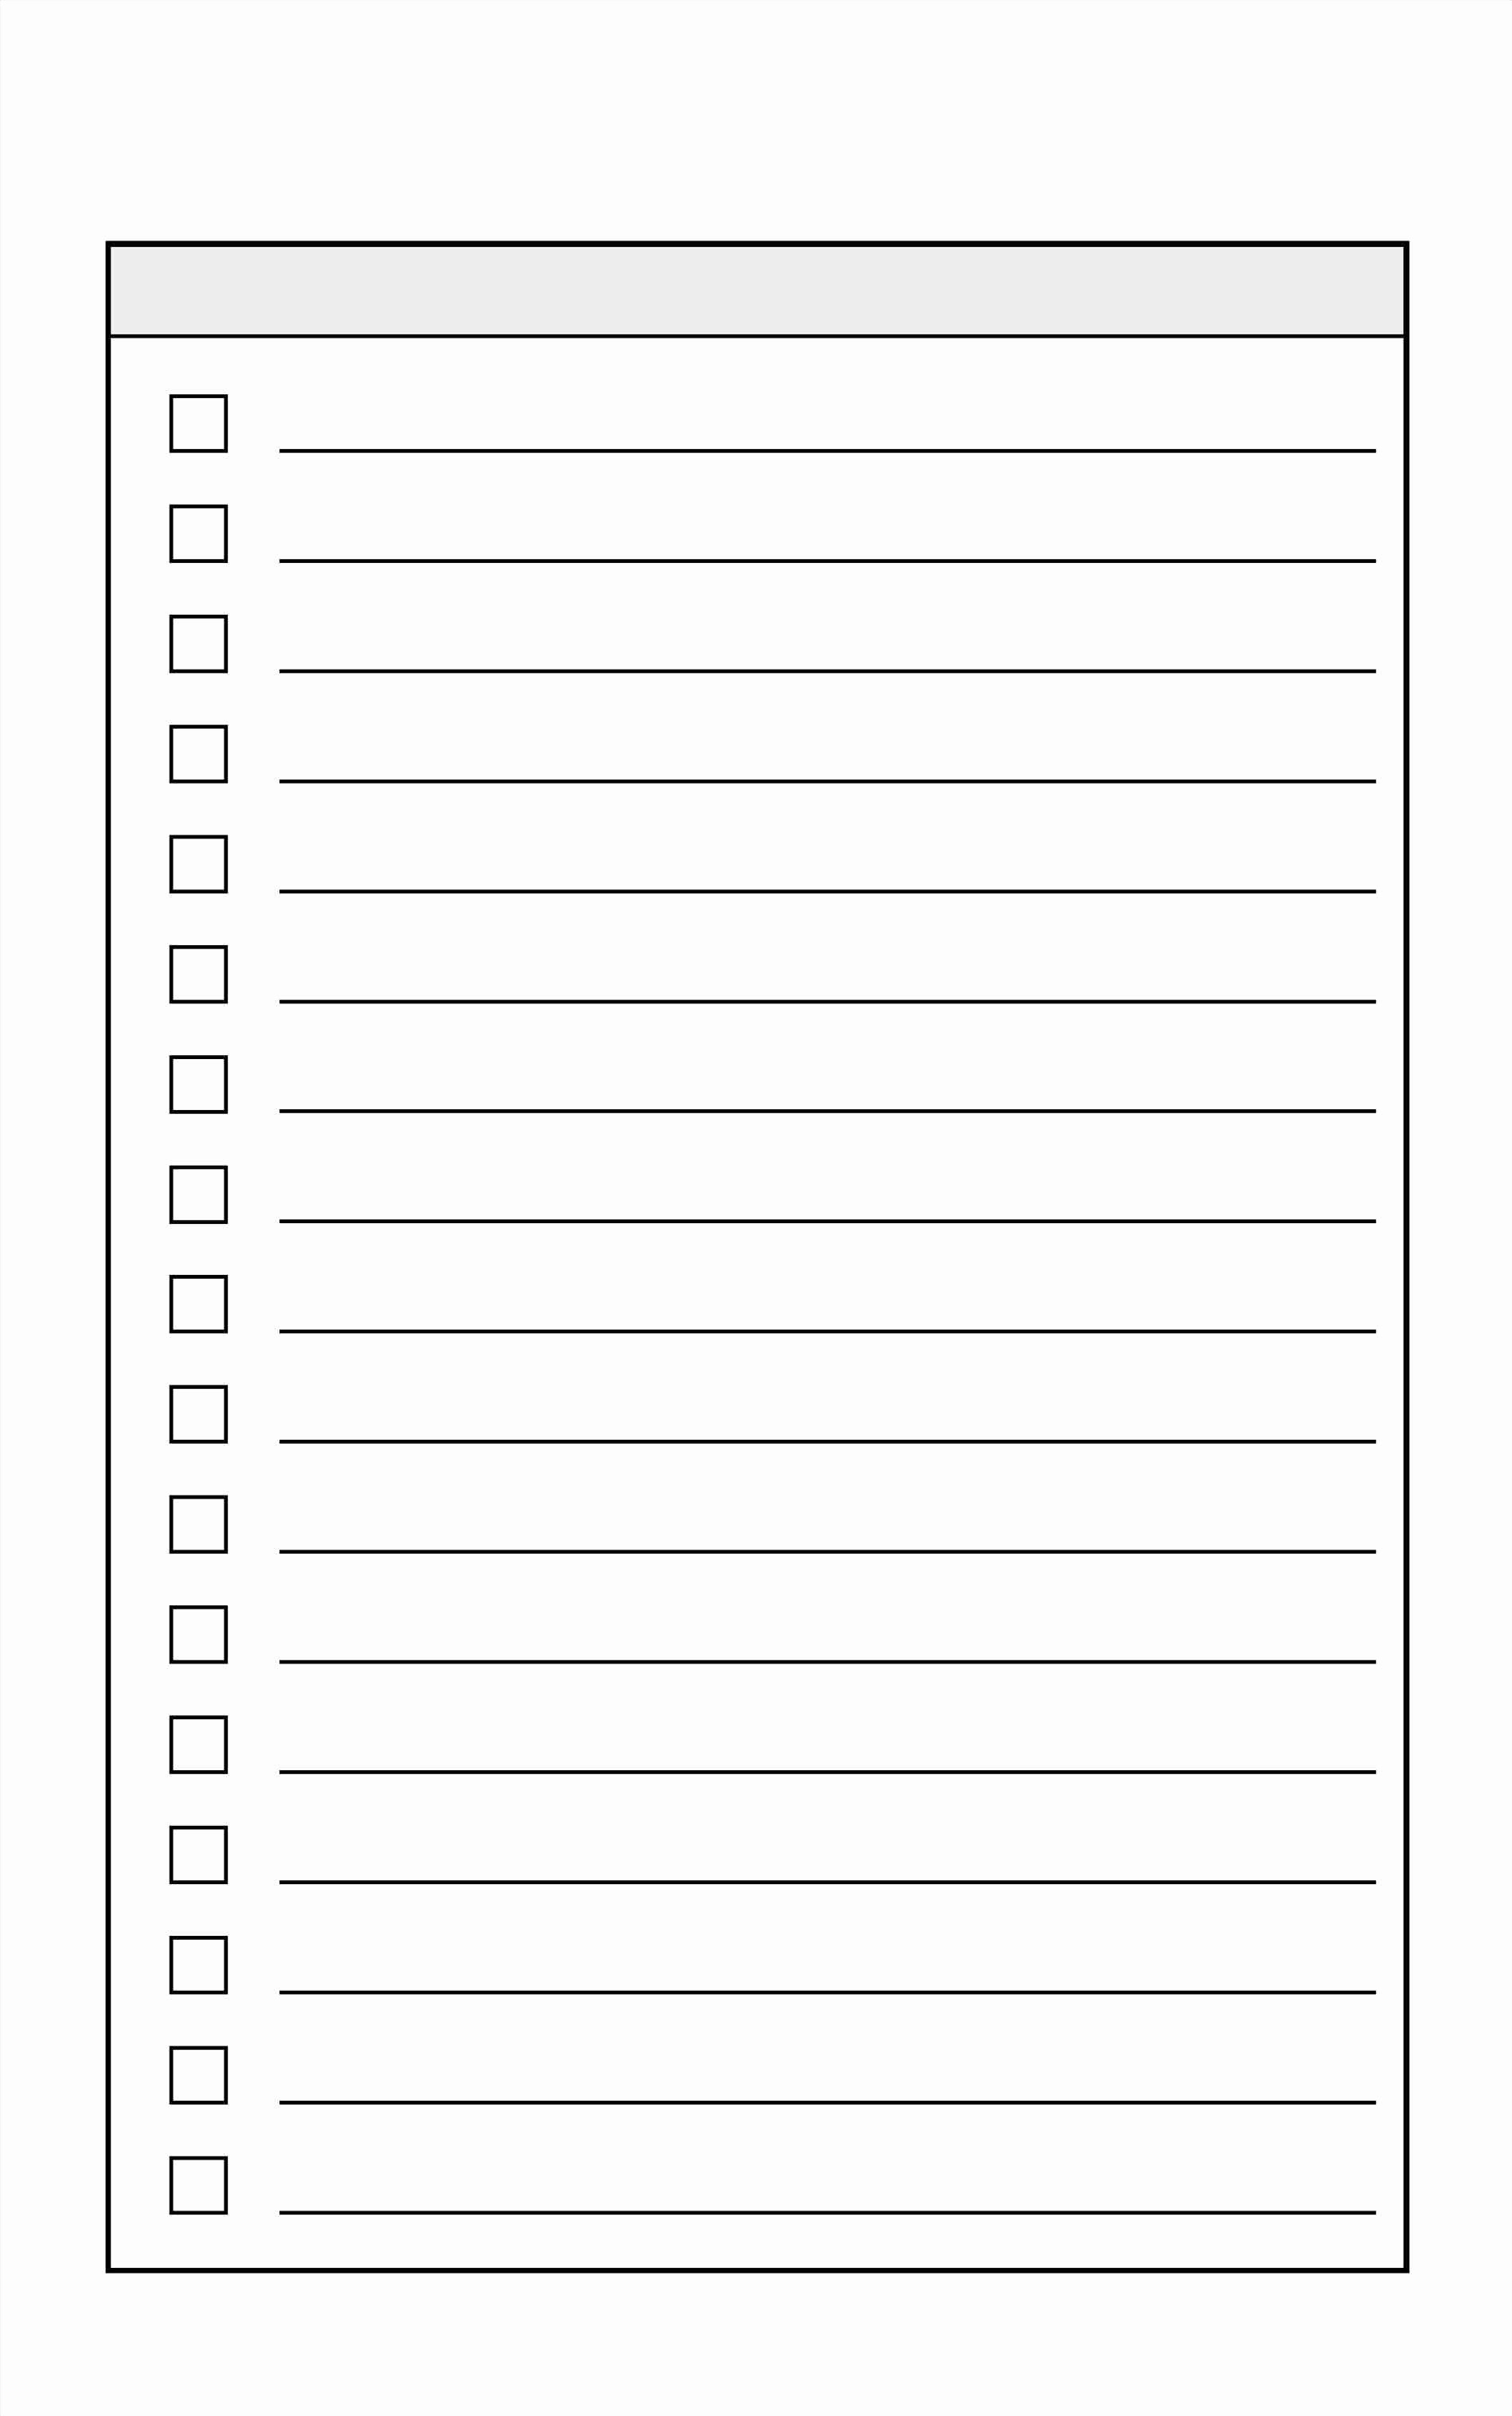 To Do List Free Download Elegant Editable to Do List Template Templates Data